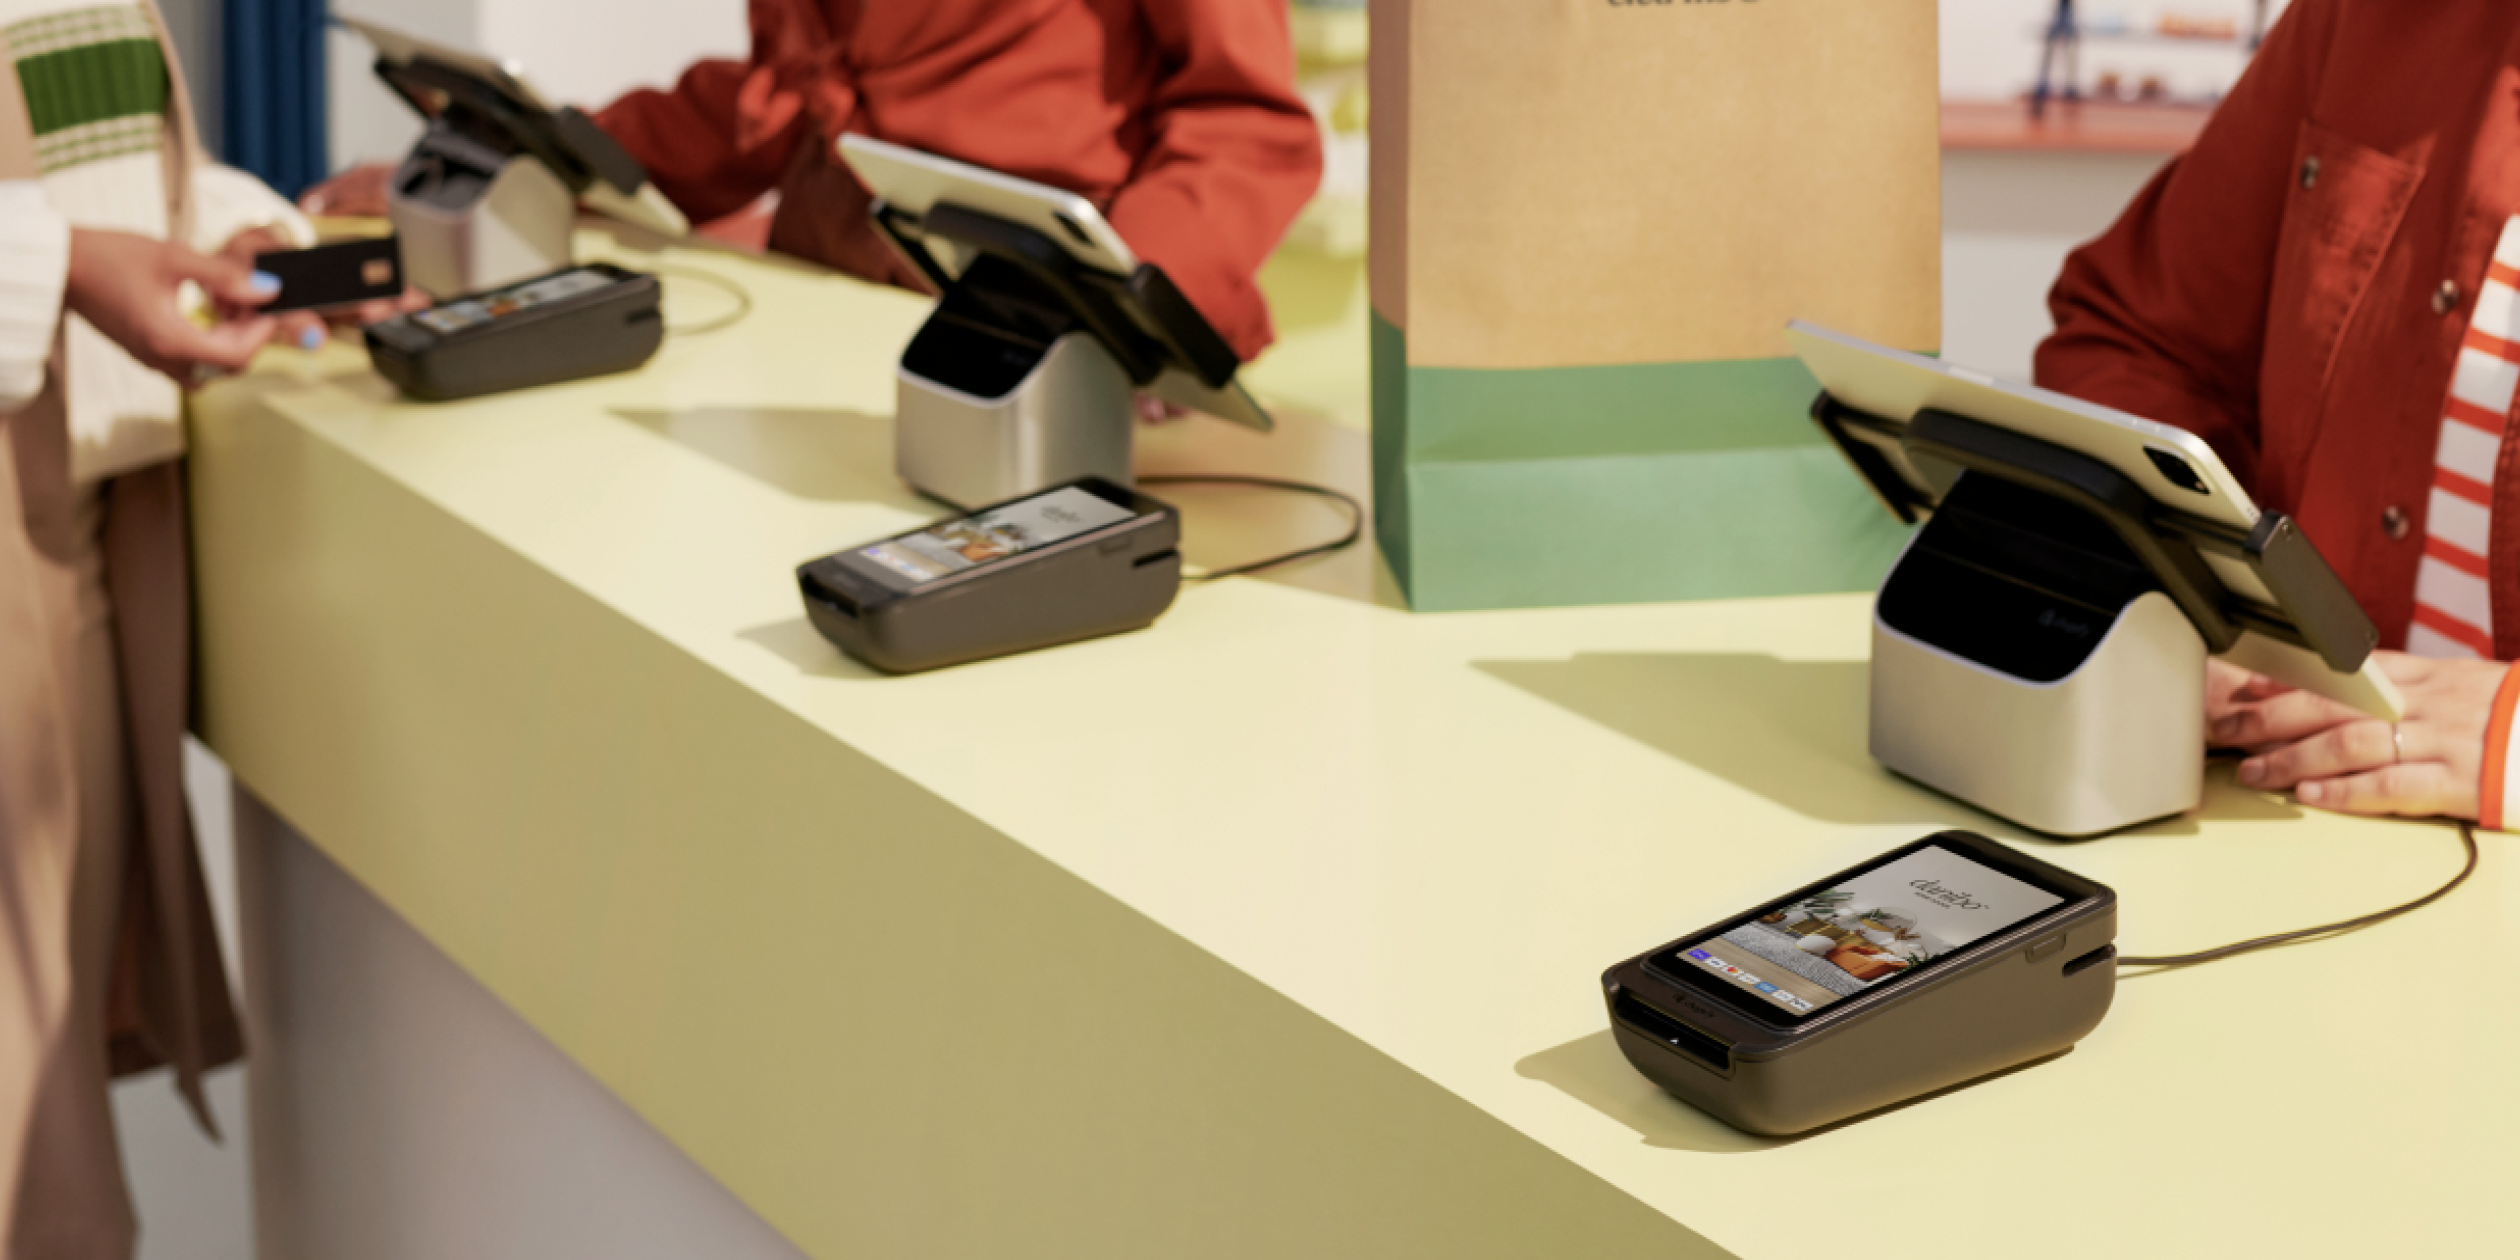 POS hardware from Shopify's Retail Collection is displayed on a retail counter. It includes POS Terminal and Tablet Stand. Tablet is sold separately.